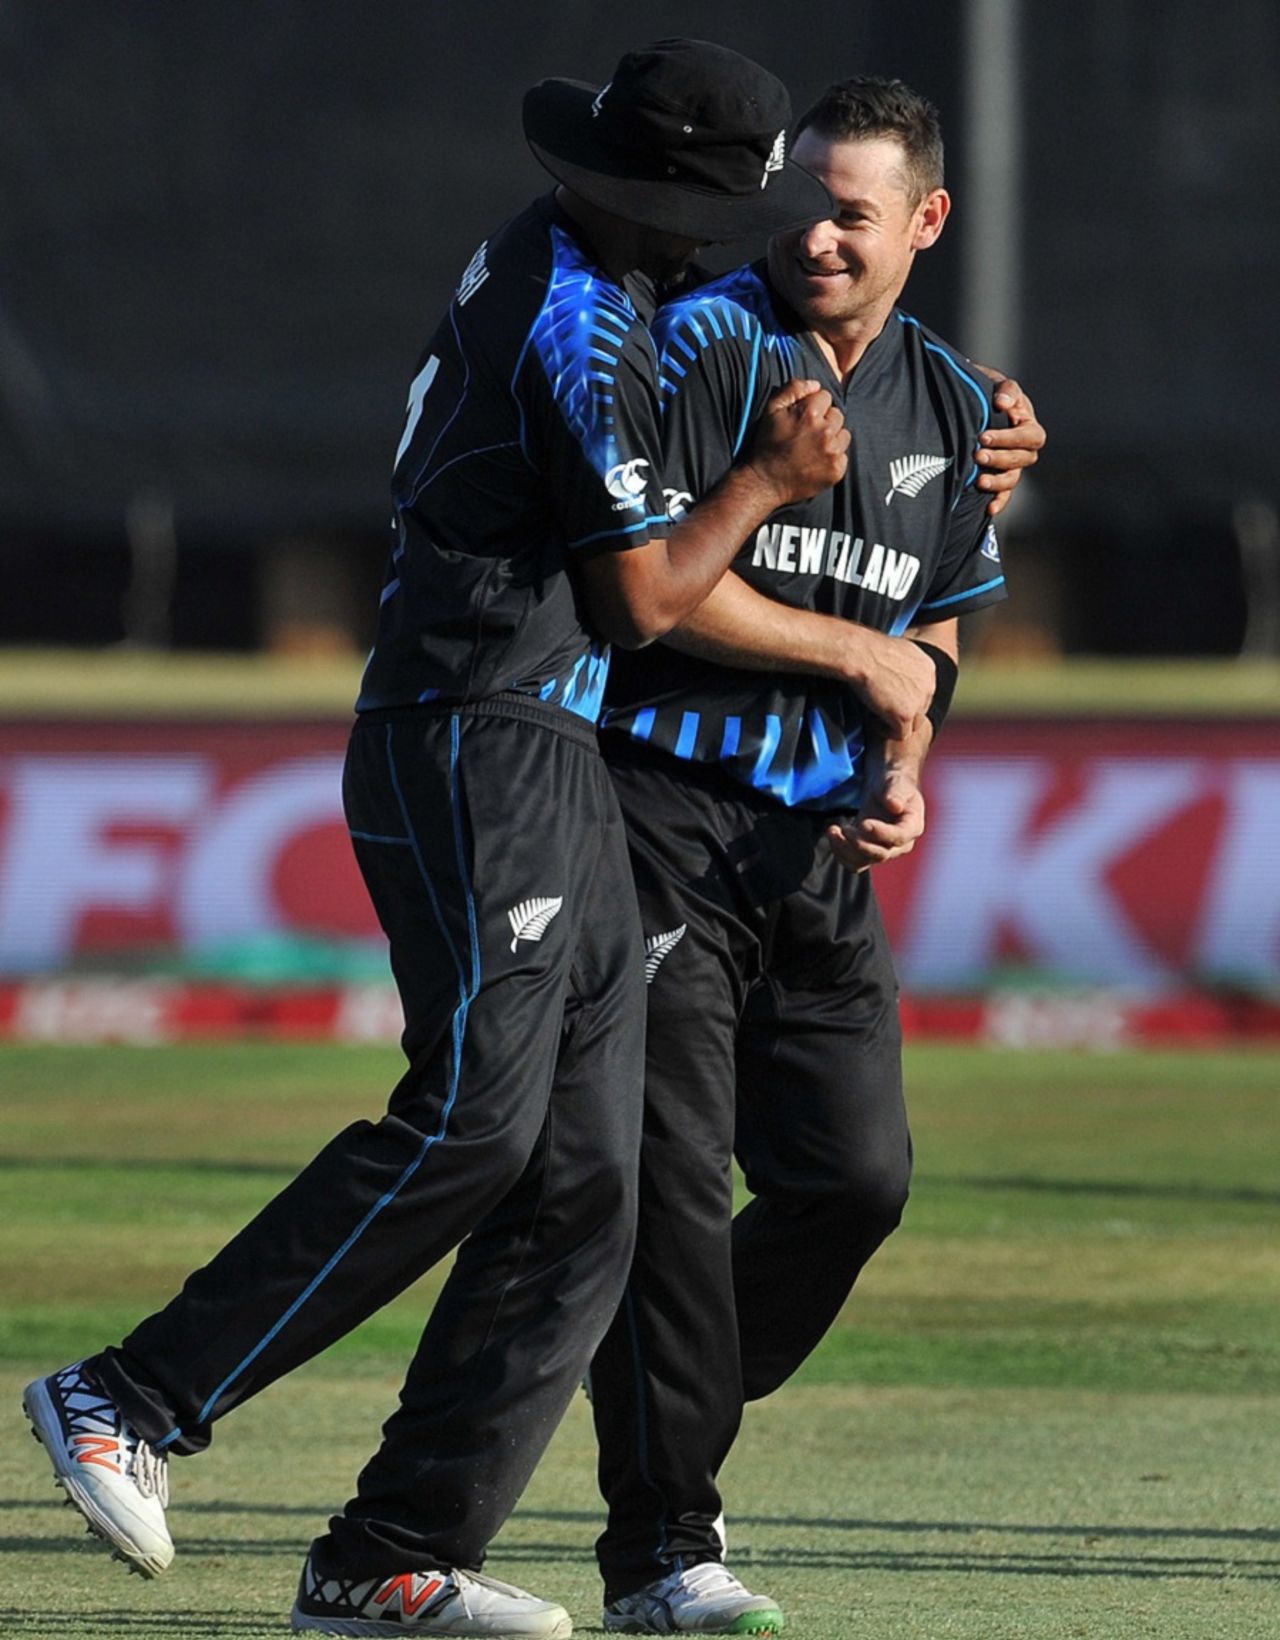 Nathan McCullum is congratulated by Ish Sodhi for dismissing AB de Villiers, South Africa v New Zealand, 2nd T20I, Centurion, August 16, 2015